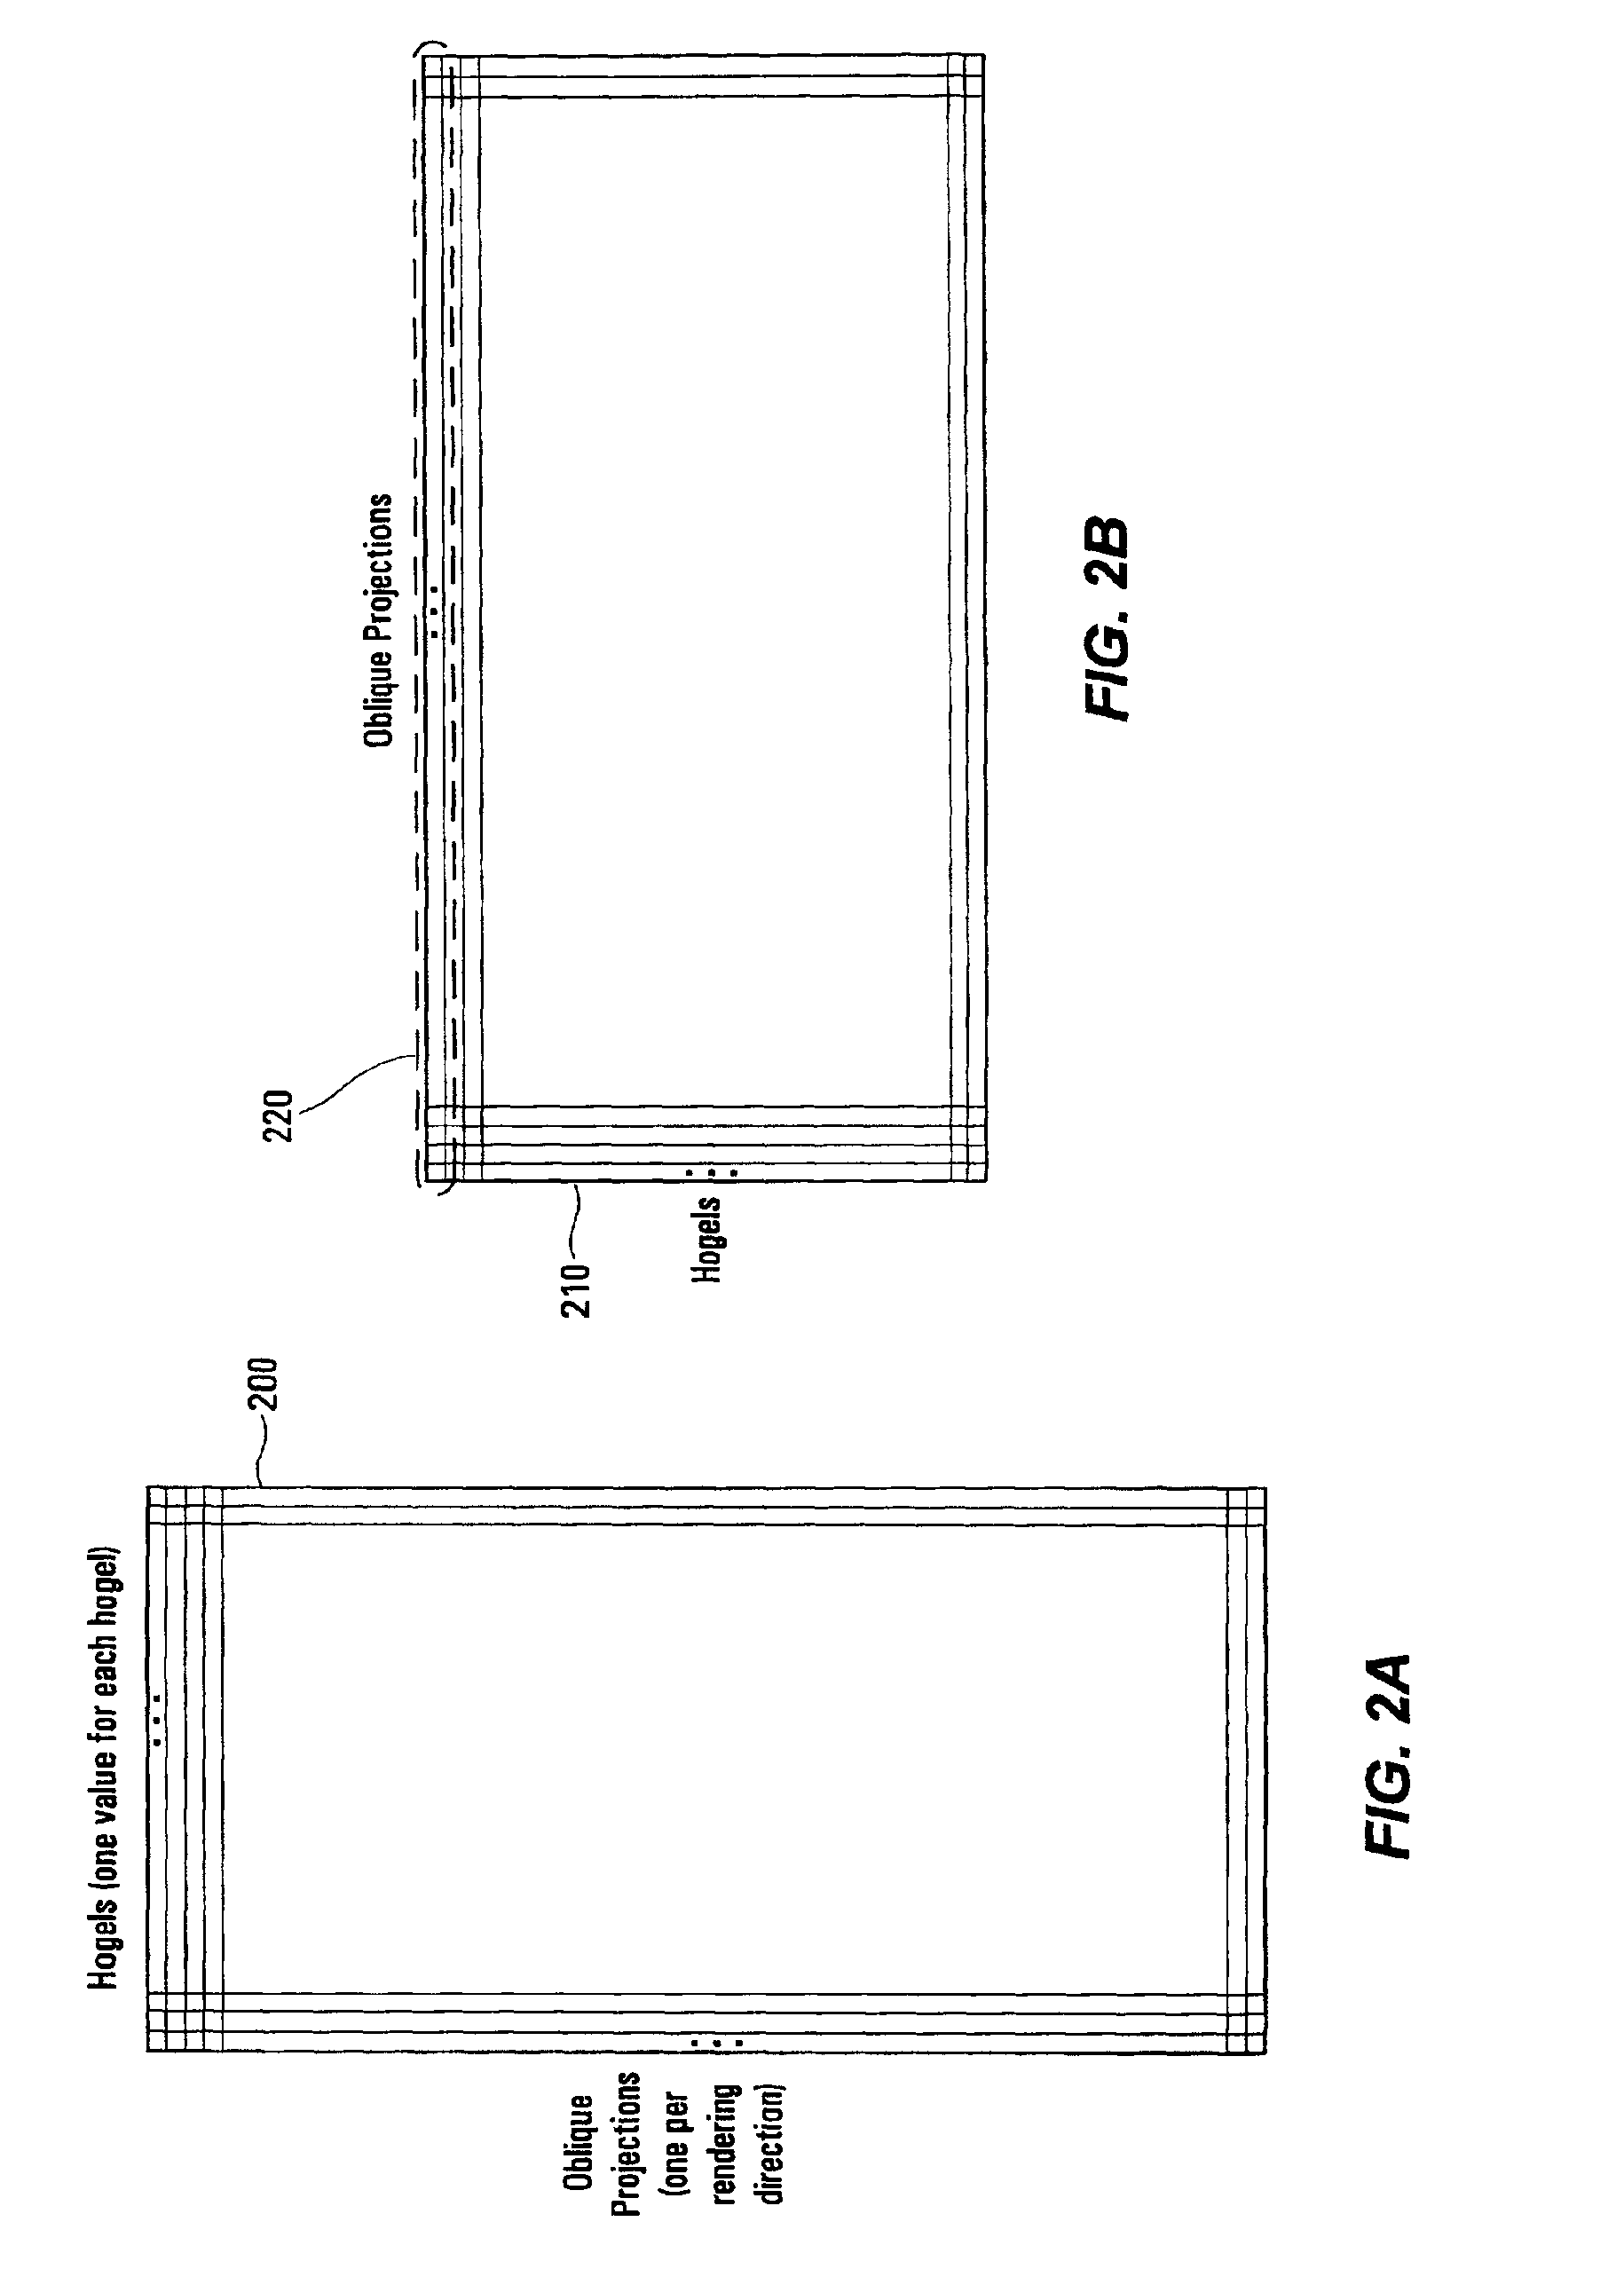 Efficient block transform including pre-processing and post processing for autostereoscopic displays